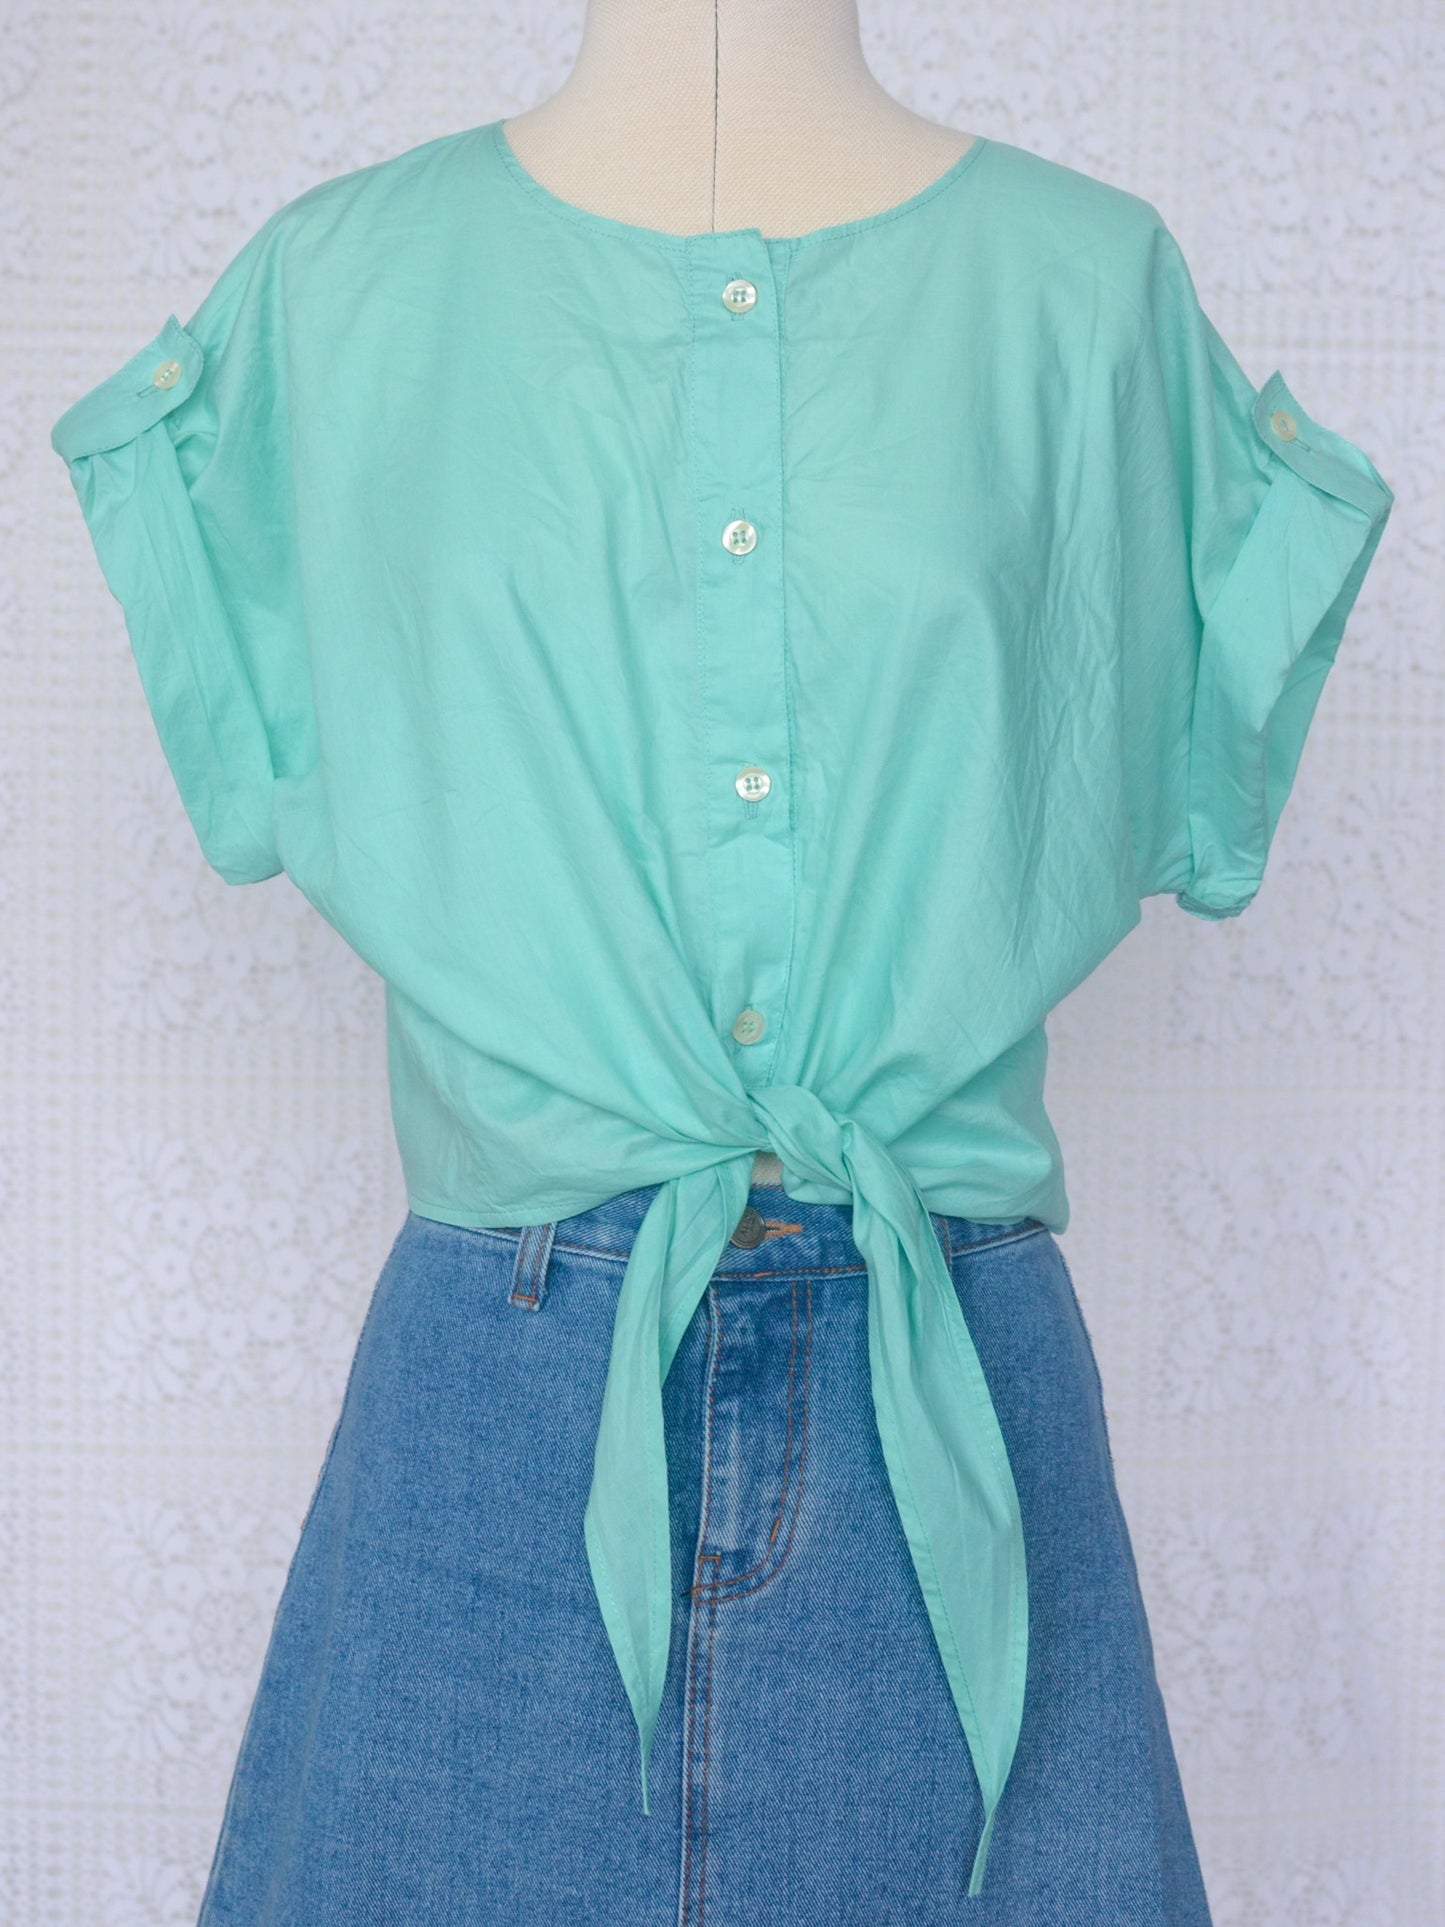 1980s style turquoise green tie waist cropped short sleeve button up top